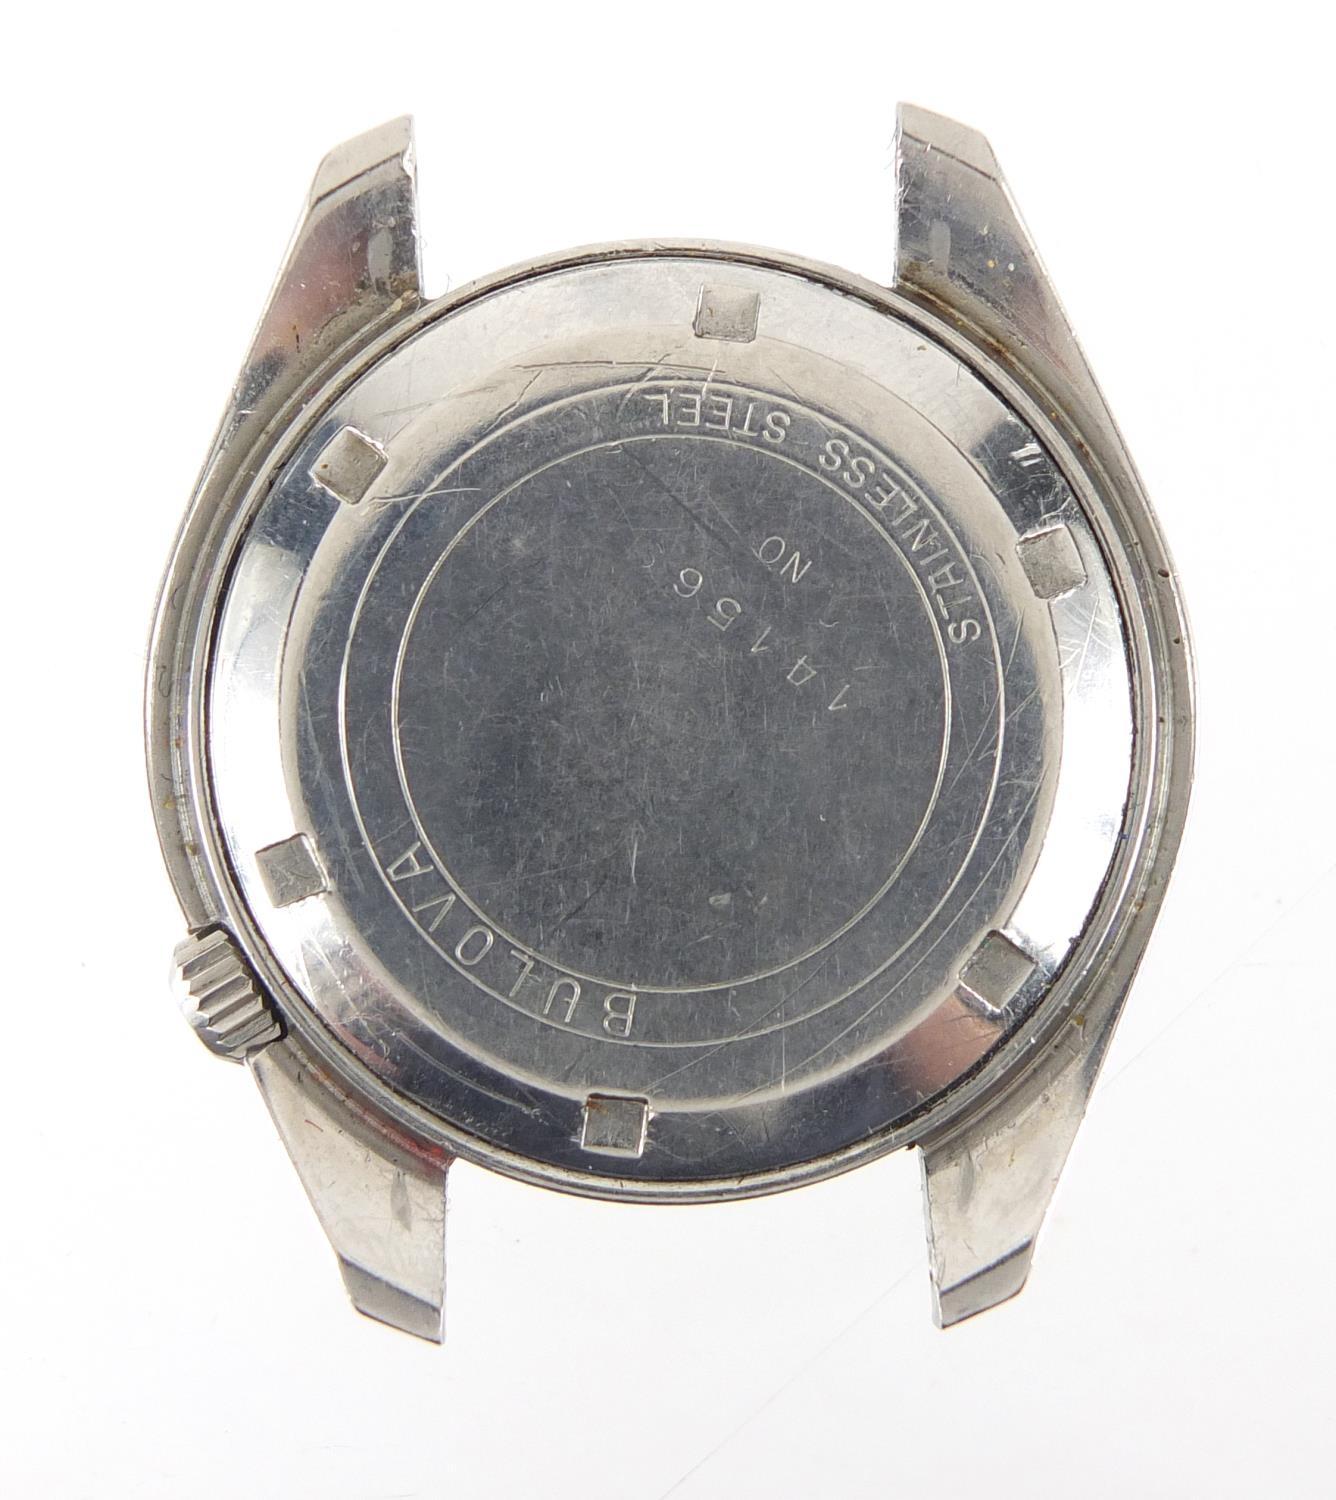 Vintage gentleman's Bulova Accutron Deep Sea wristwatch with date dial, luminous hands and marks, - Image 2 of 3